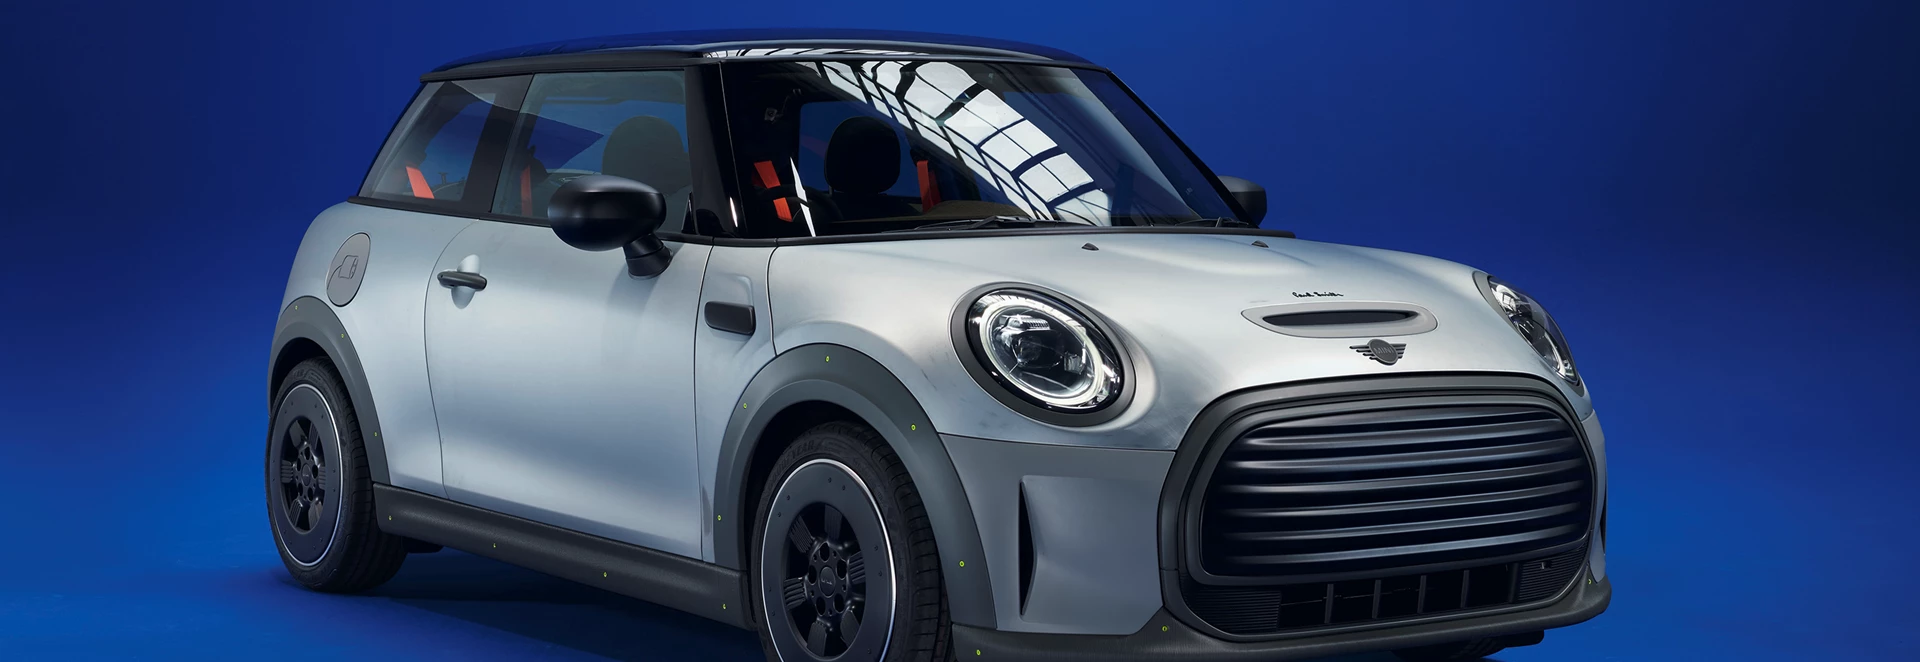 Paul Smith and Mini team up to make stripped-back concept car 